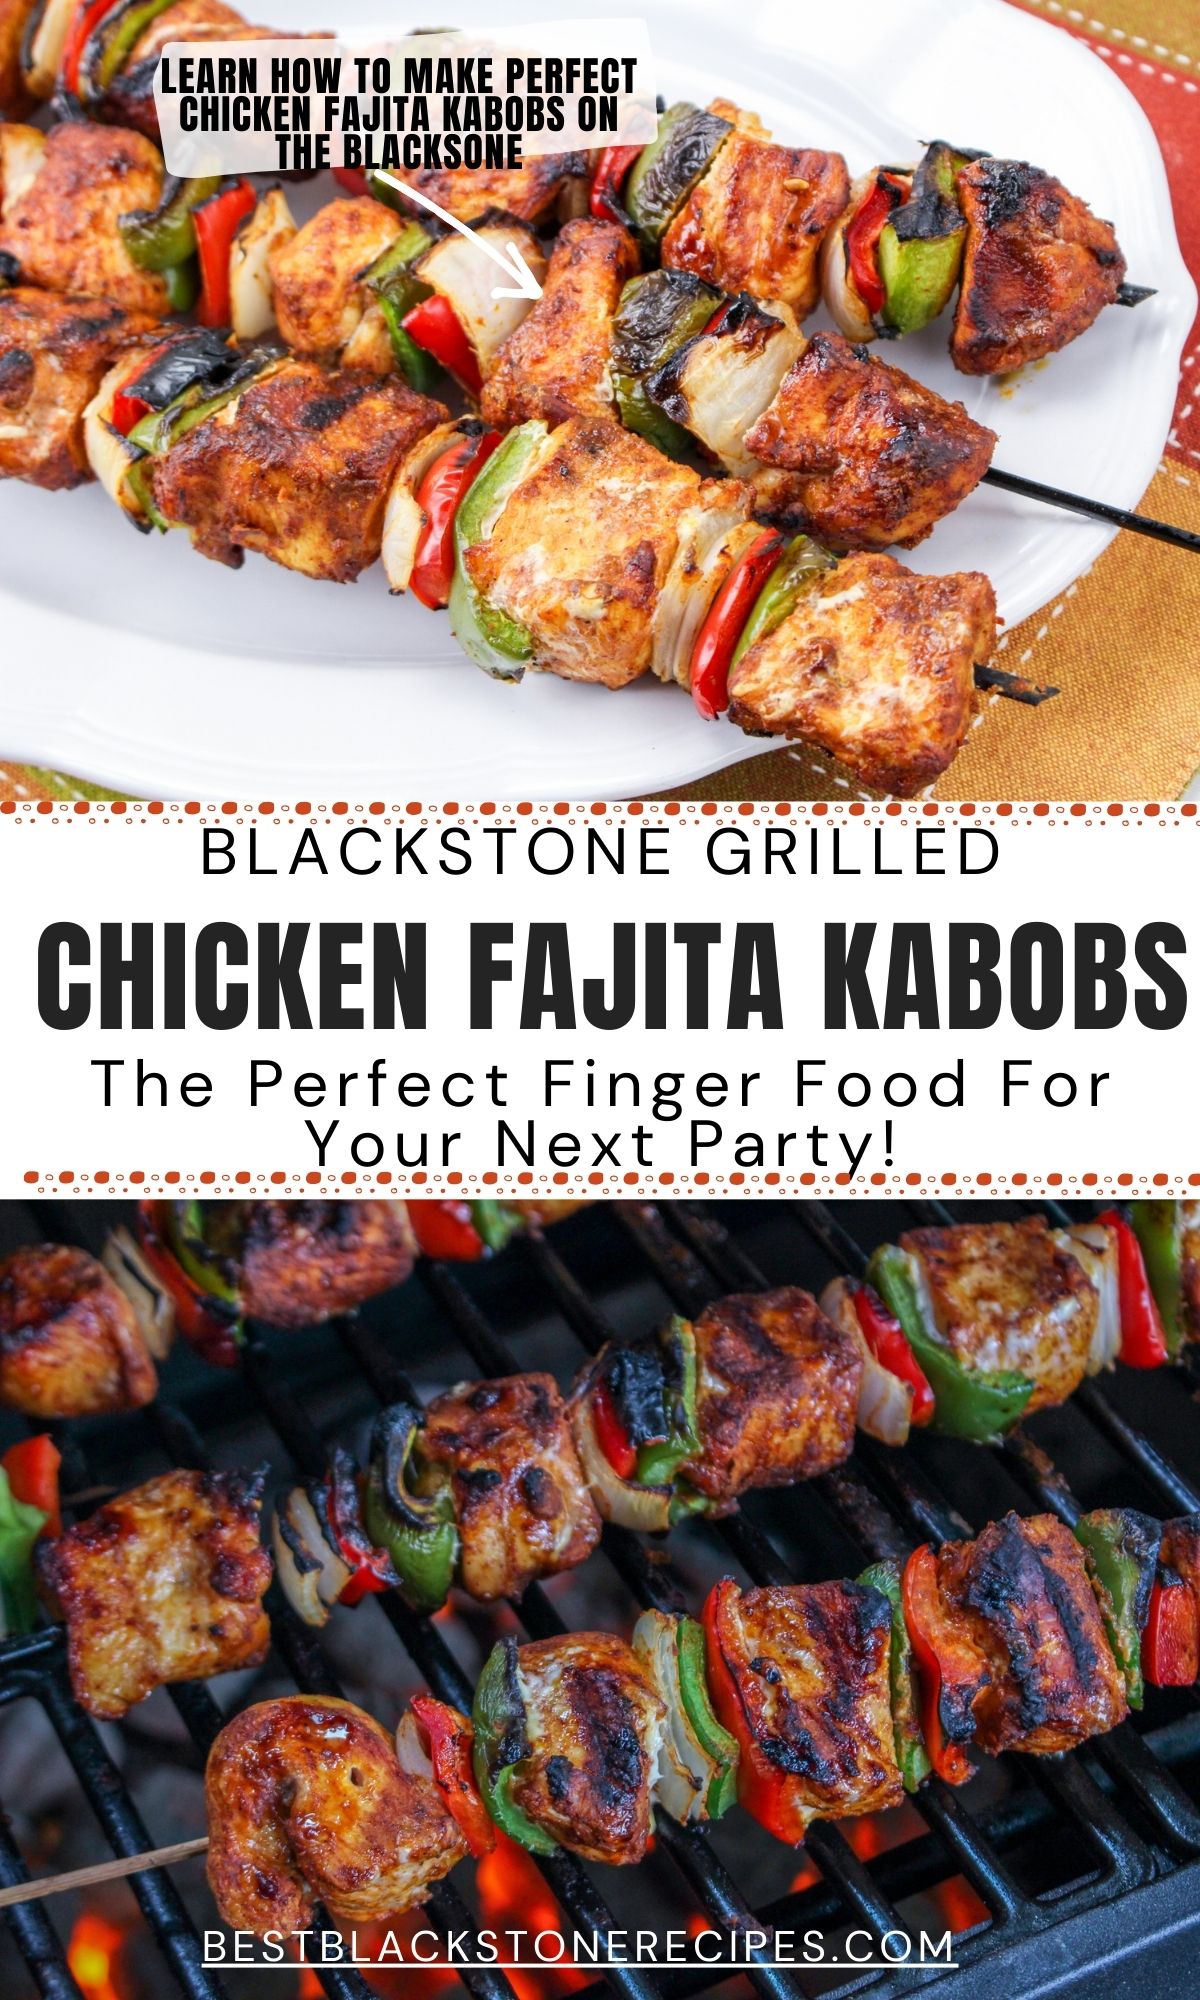 Blackstone grilled chicken fajita kabobs the perfect finger food for your party.